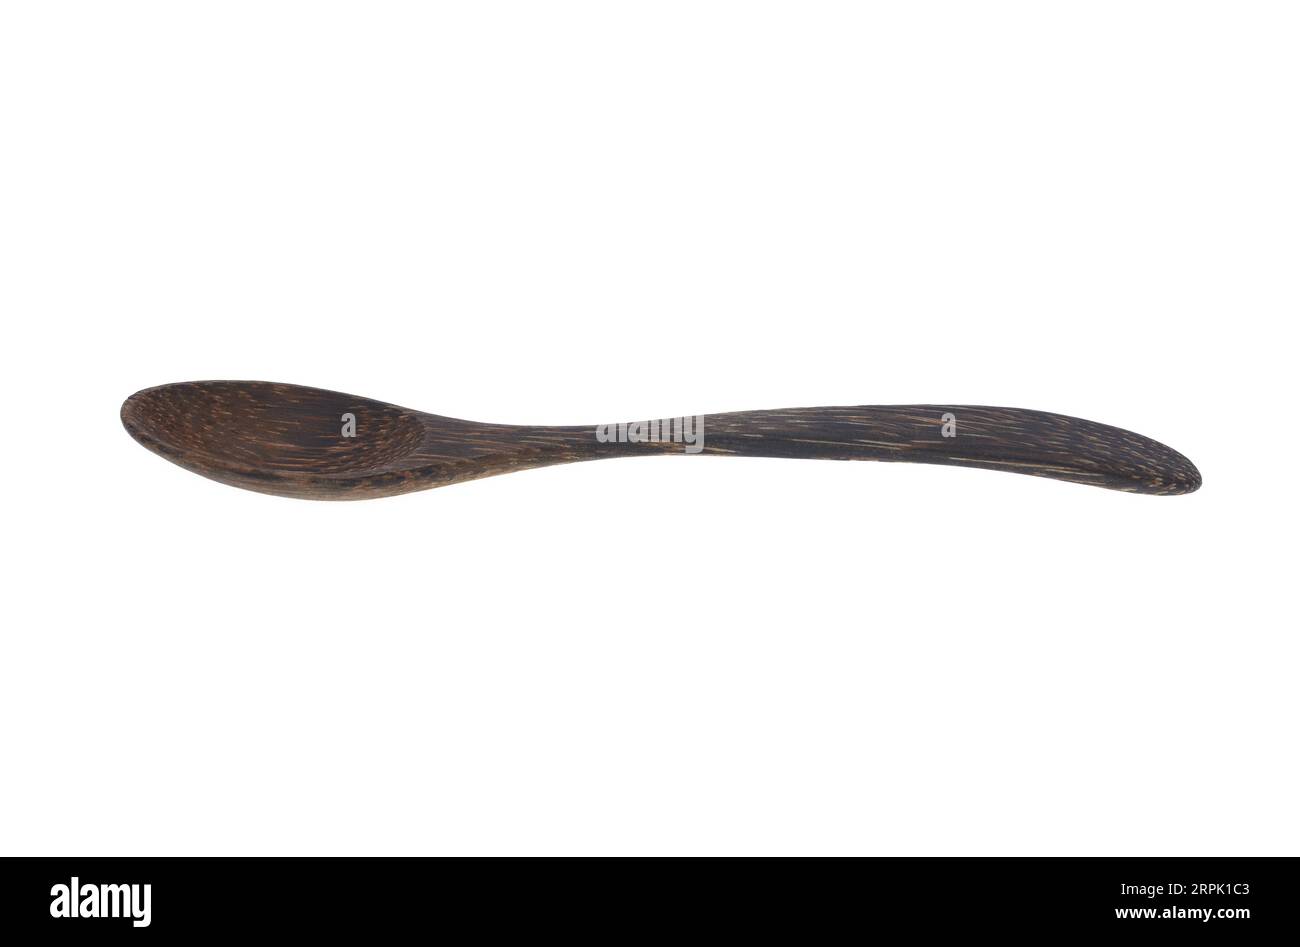 It is coconut shell spoon isolated on white. Stock Photo